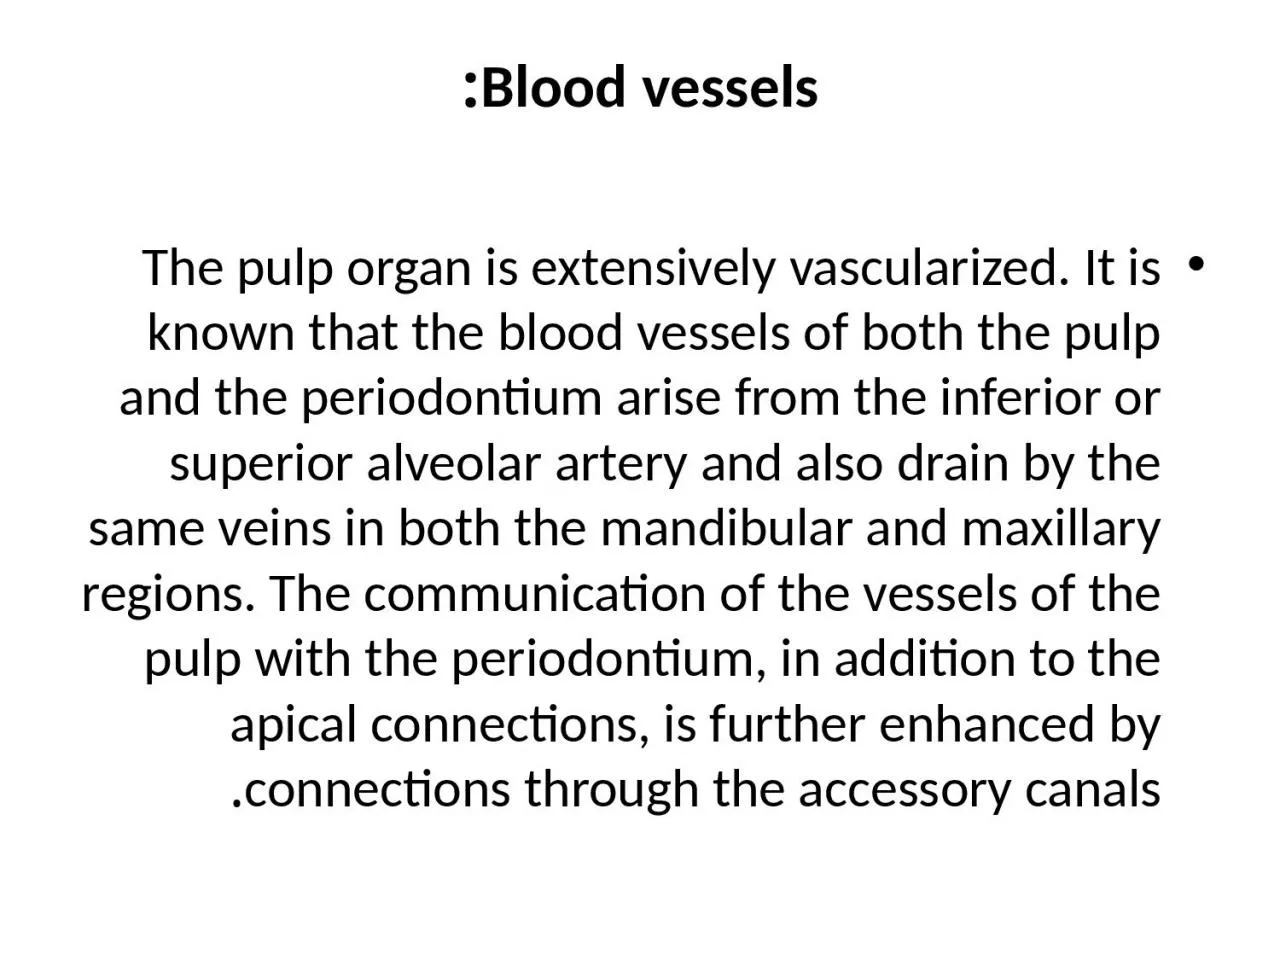 Blood vessels: The pulp organ is extensively